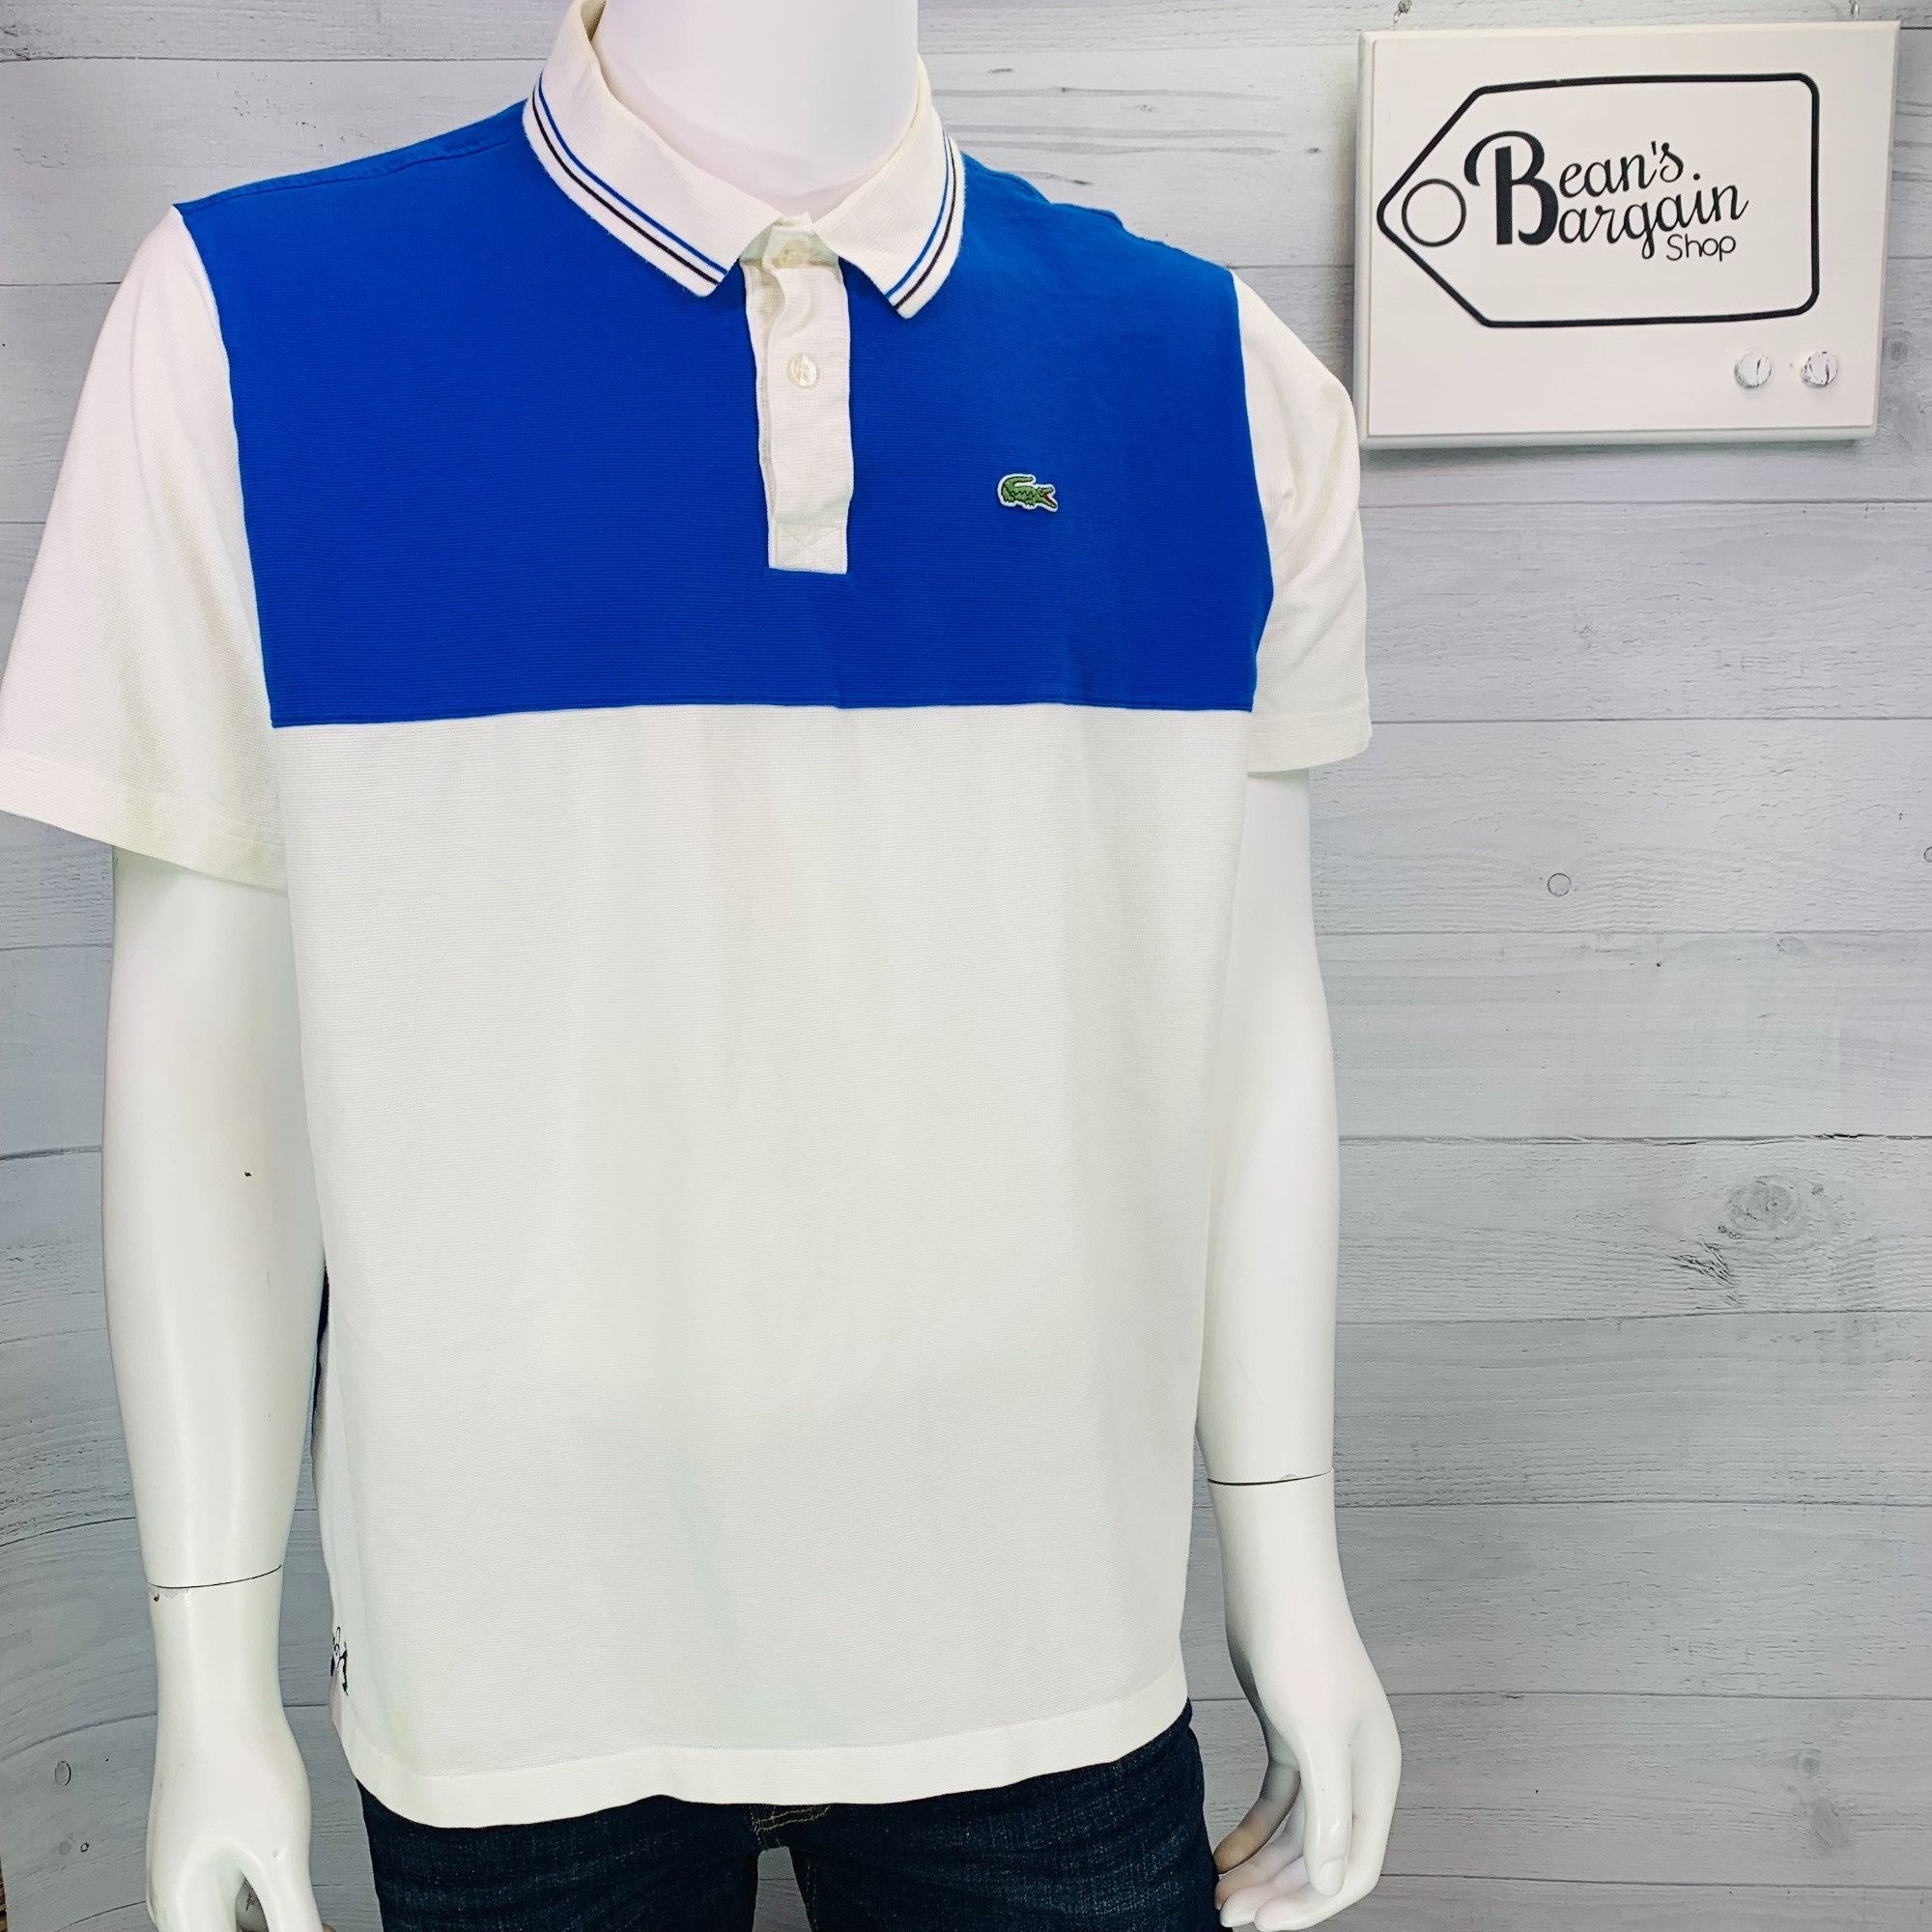 Lacoste Lacoste X Andy Roddick Polo Shirt Blue White Color | Grailed